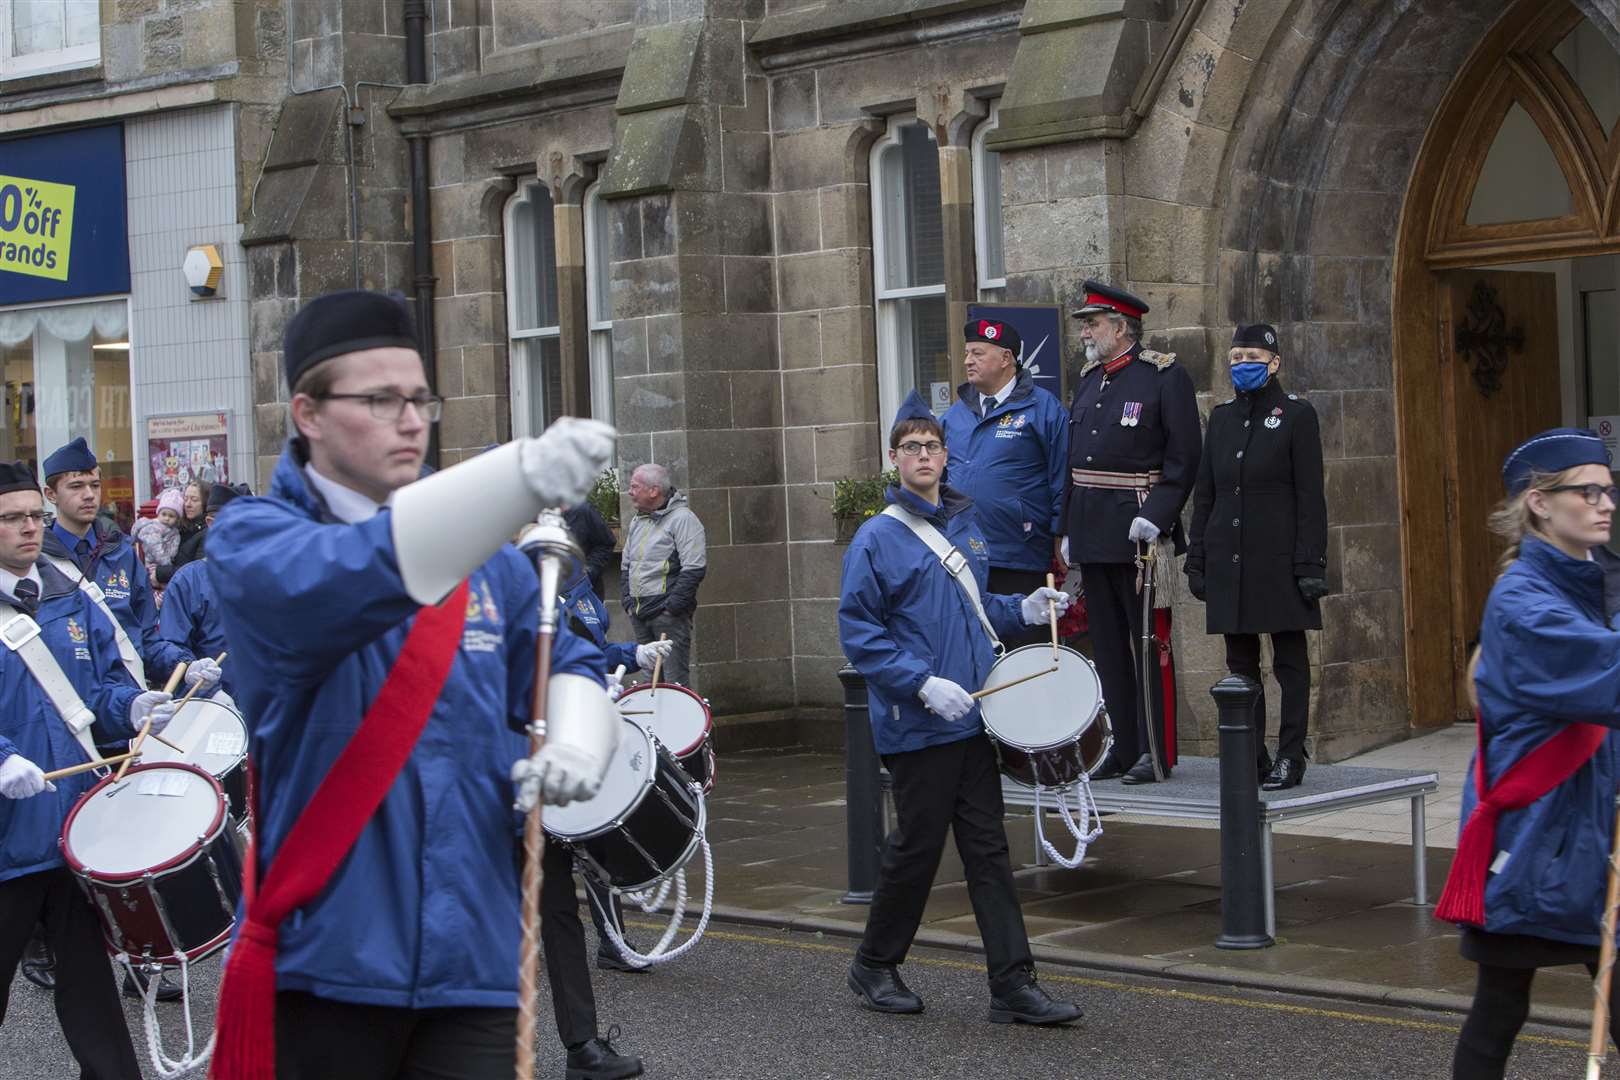 Lord Lieutenant, Lord Thurso (centre), Johanna Geddes, captain of the 1st Thurso Company Boys Brigade (right) and Paul Whistle commanding officer of the Boys Brigade Tour Band took the salute during the Band's visit to Thurso, on Wednesday afternoon